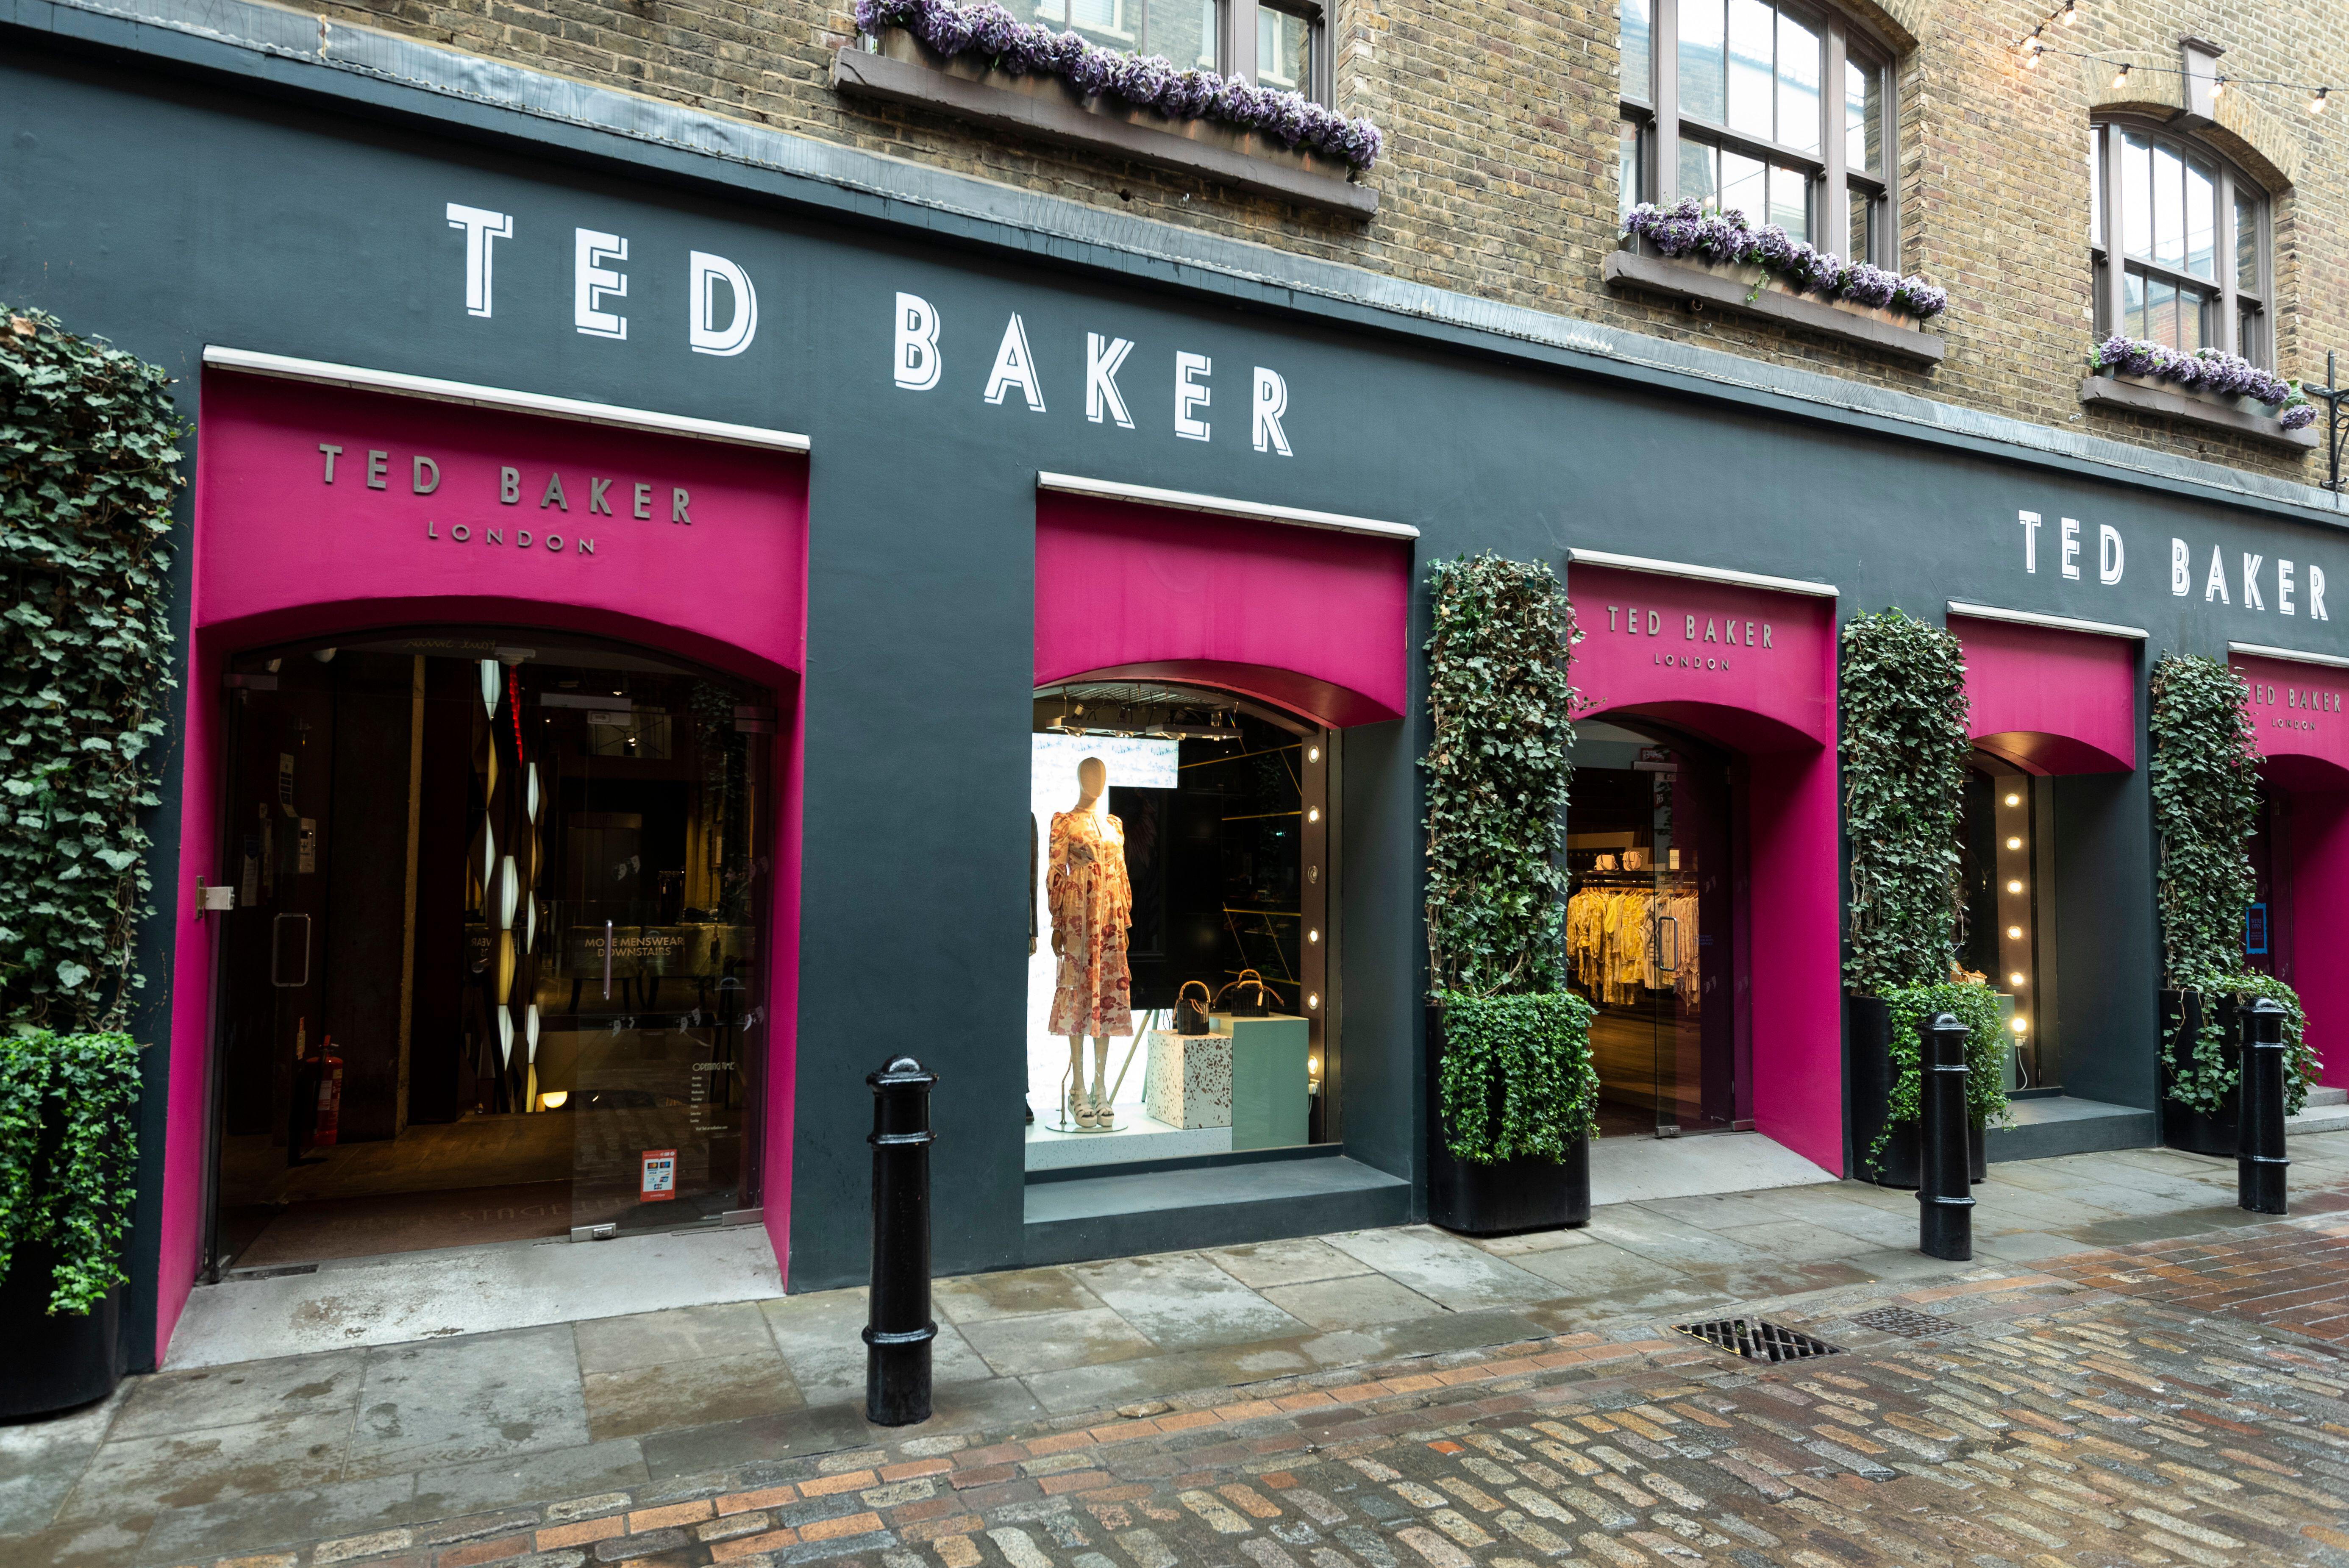 IS TED BAKER A LUXURY BRAND?